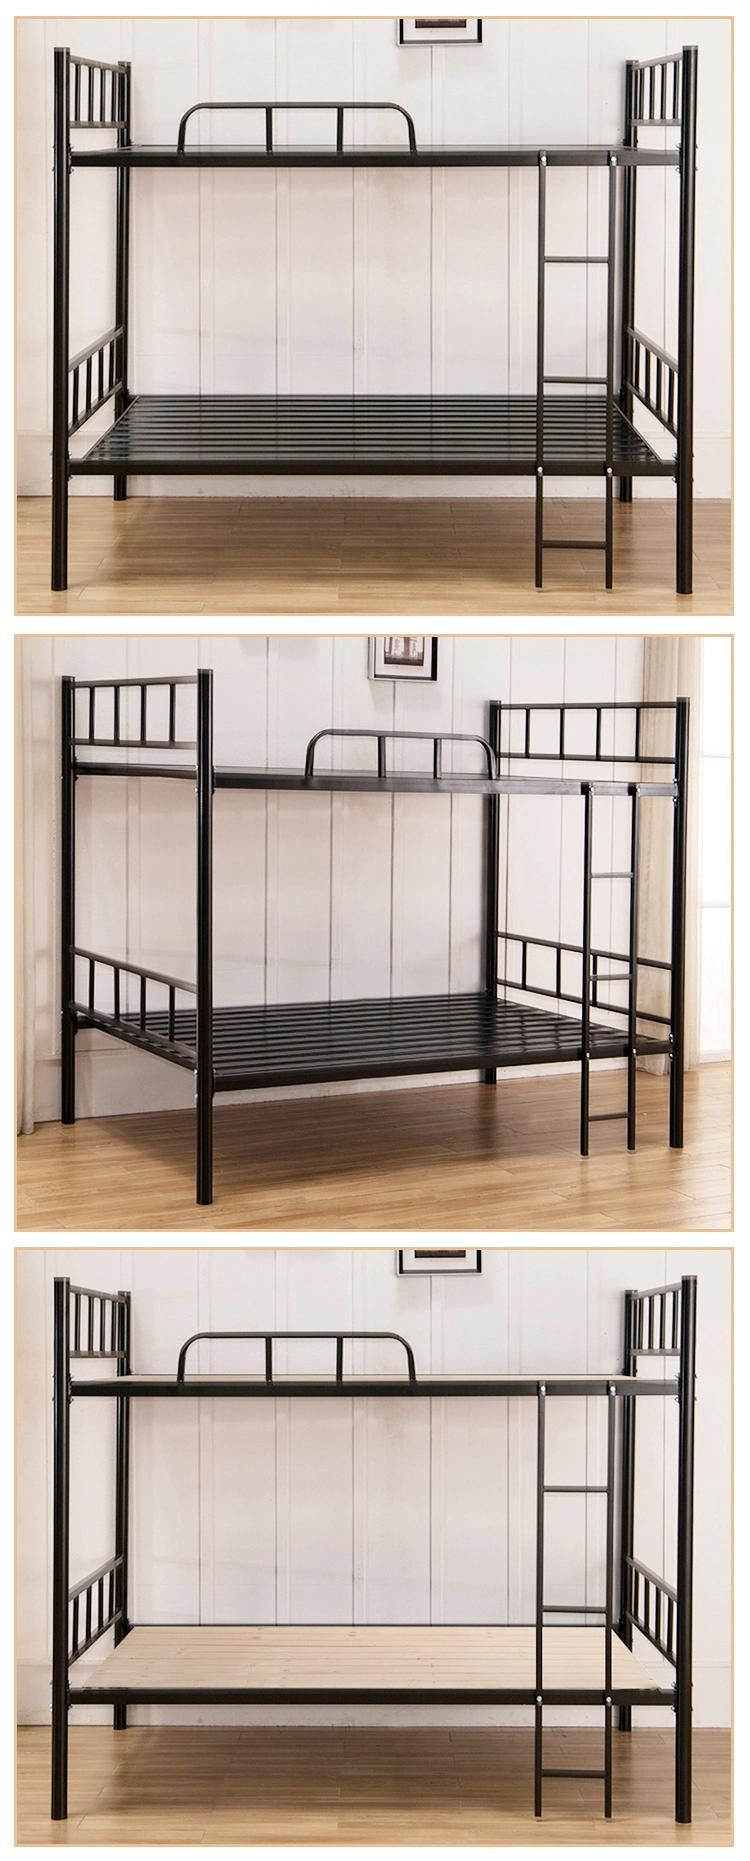 Factory Outlet Bedroom Furniture Adult Steel Iron Metal Bunk Bed Prices